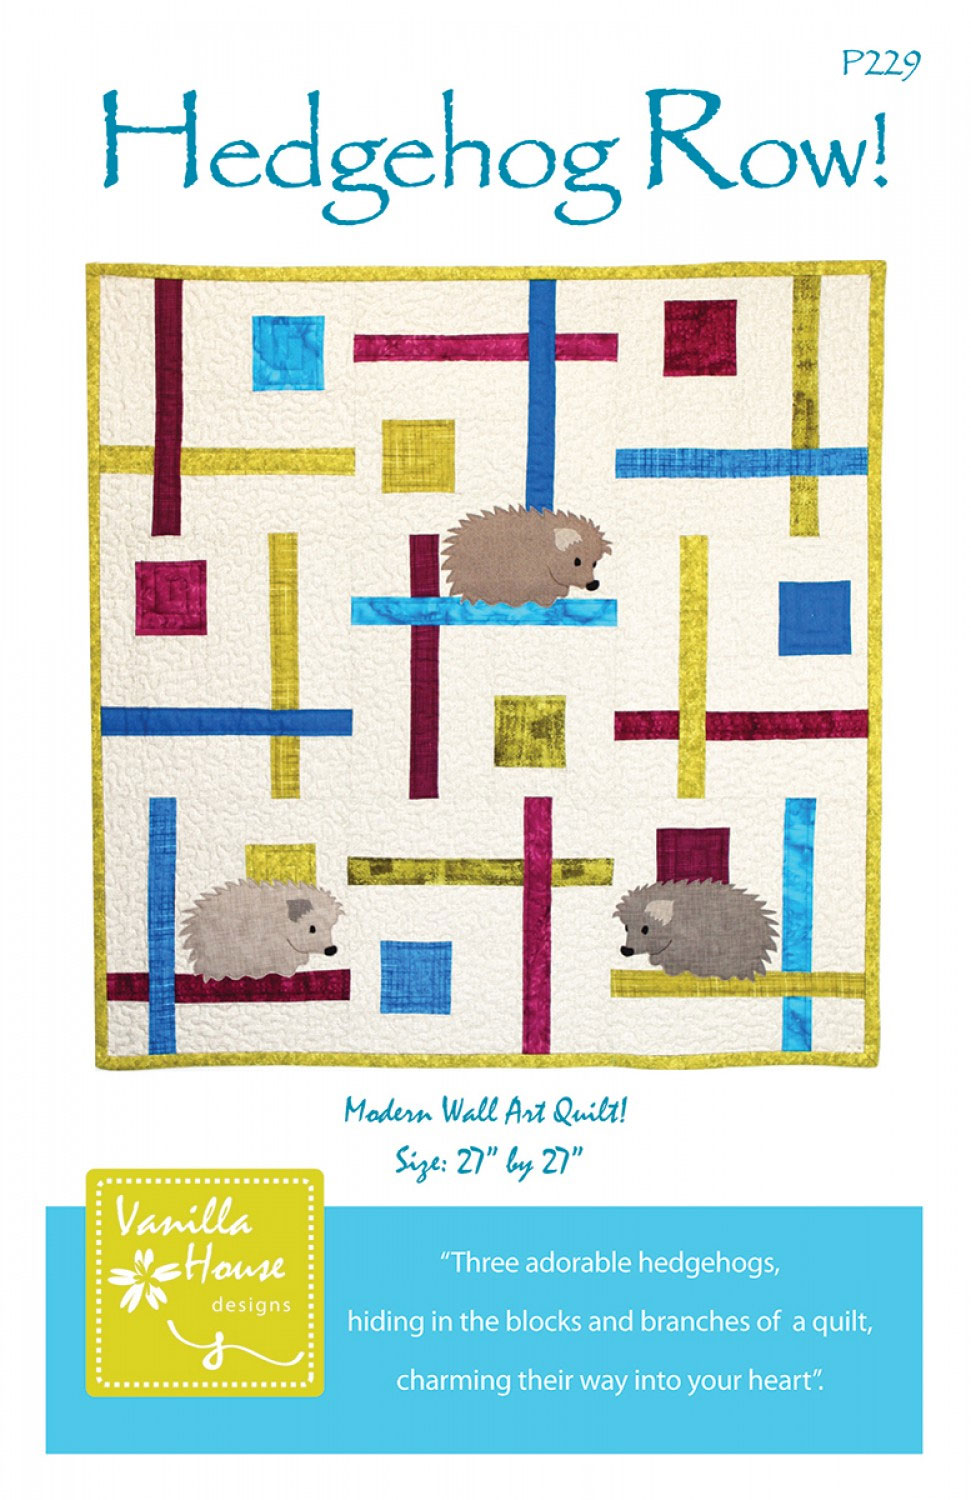 Hedgehog-Row-quilt-sewing-pattern-Vanilla-House-Designs-front